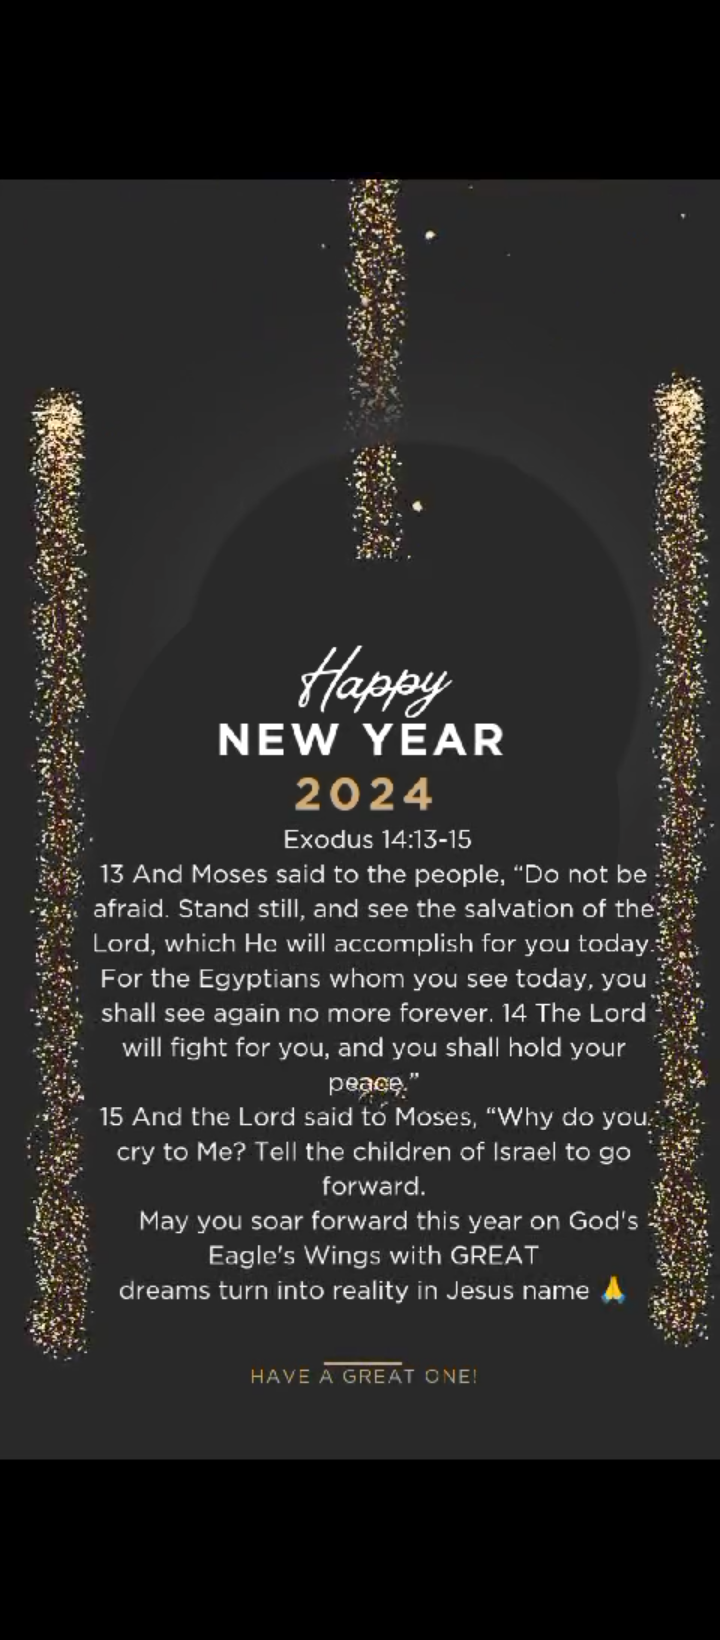 Happy New Year 2024! Soar Forward on God's Eagle's Wings in this year 2024 - God's Eagle Ministries